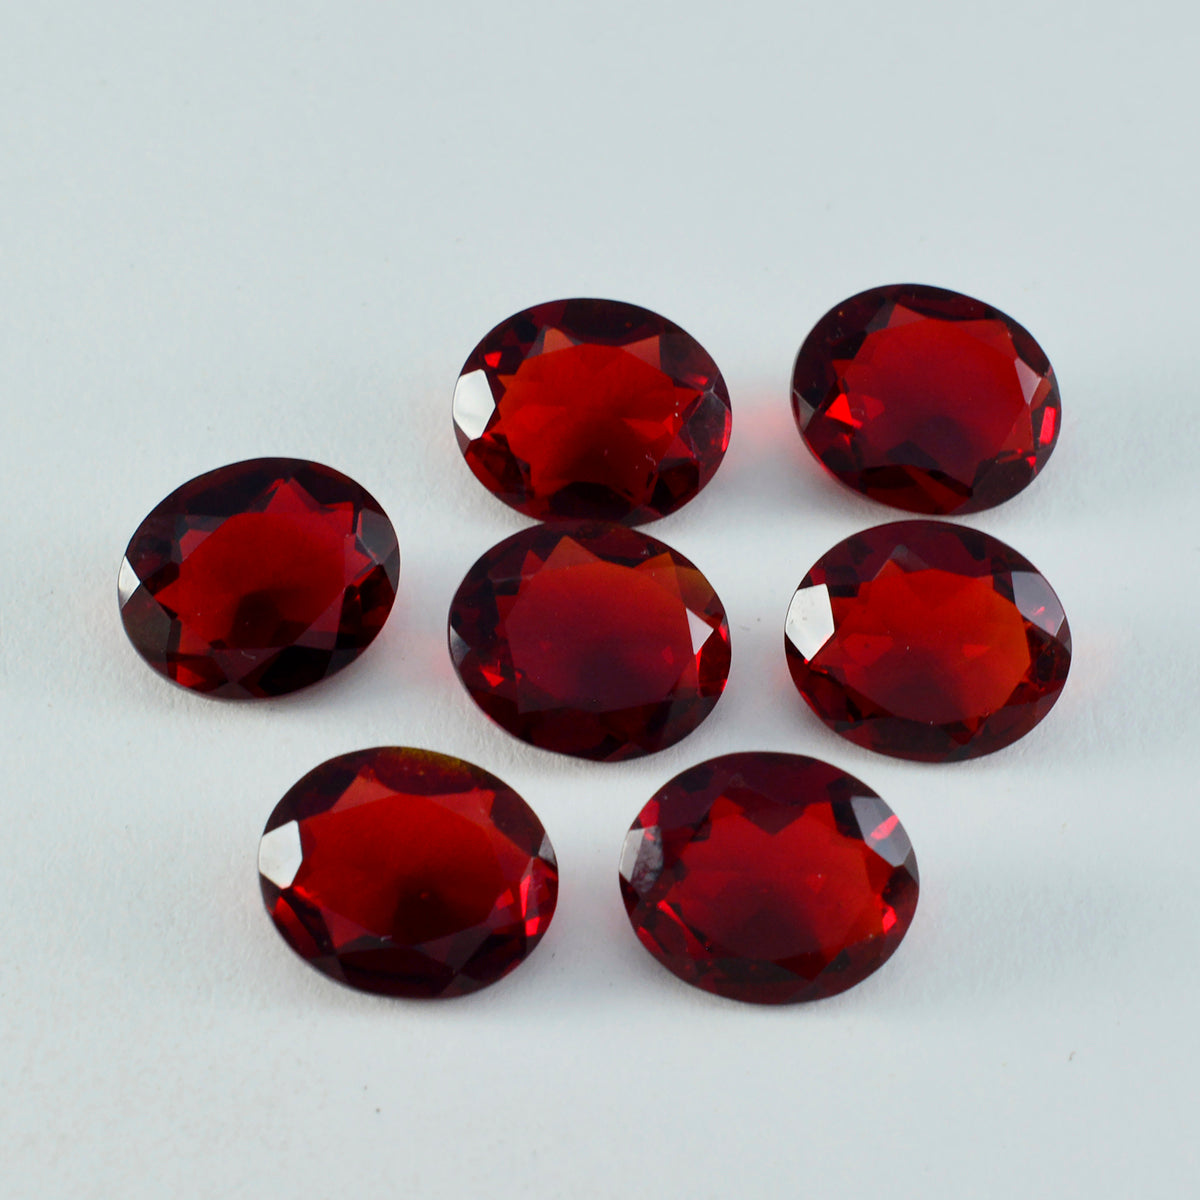 Riyogems 1PC Red Ruby CZ Faceted 7x9 mm Oval Shape lovely Quality Stone